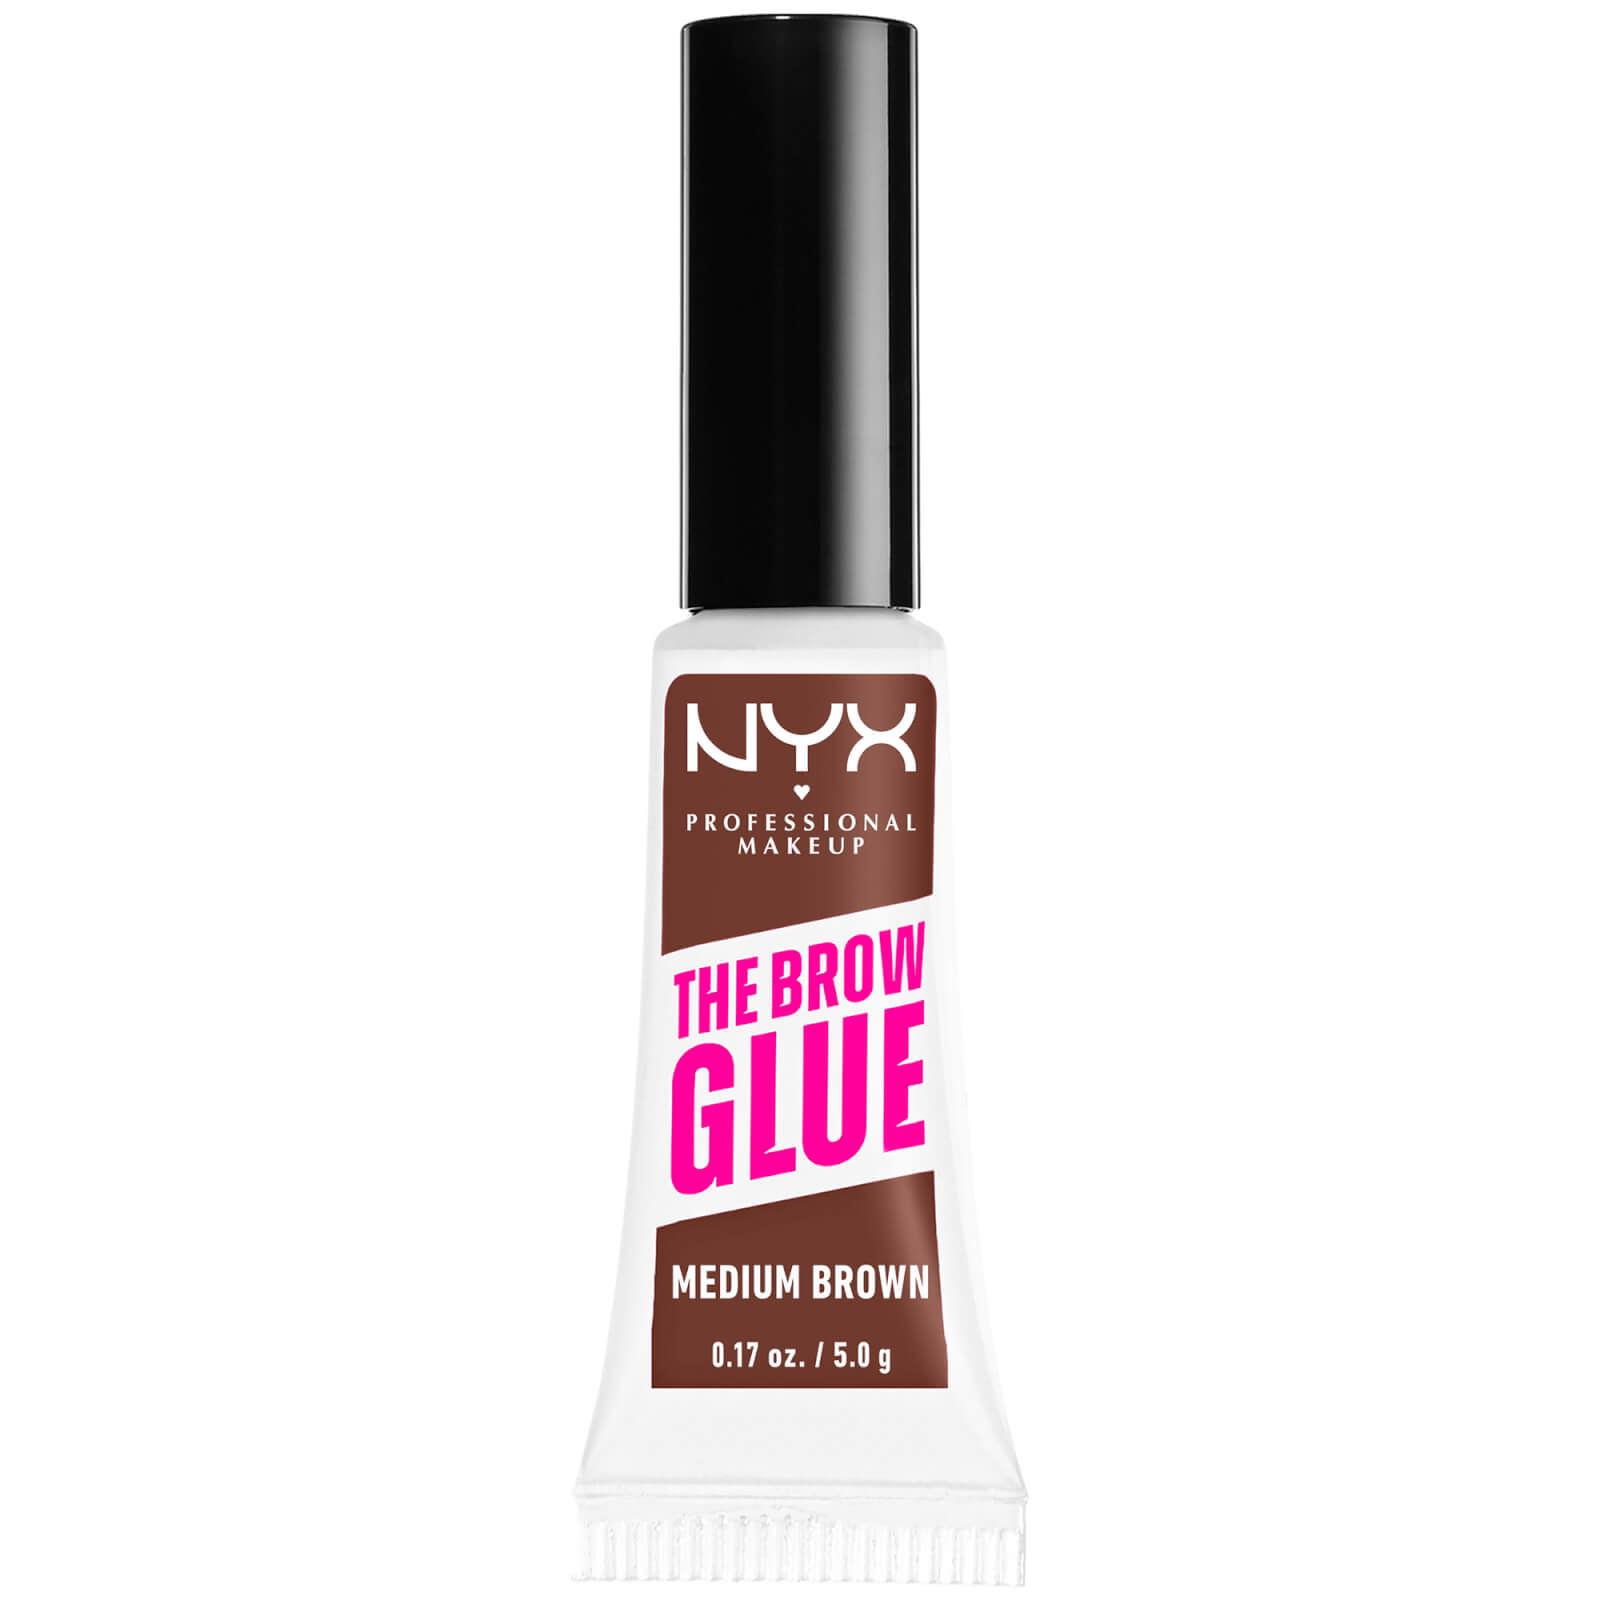 NYX Professional Makeup The Brow Glue Instant Styler 5g (Various Shades) - Medium Brown von NYX Professional Makeup